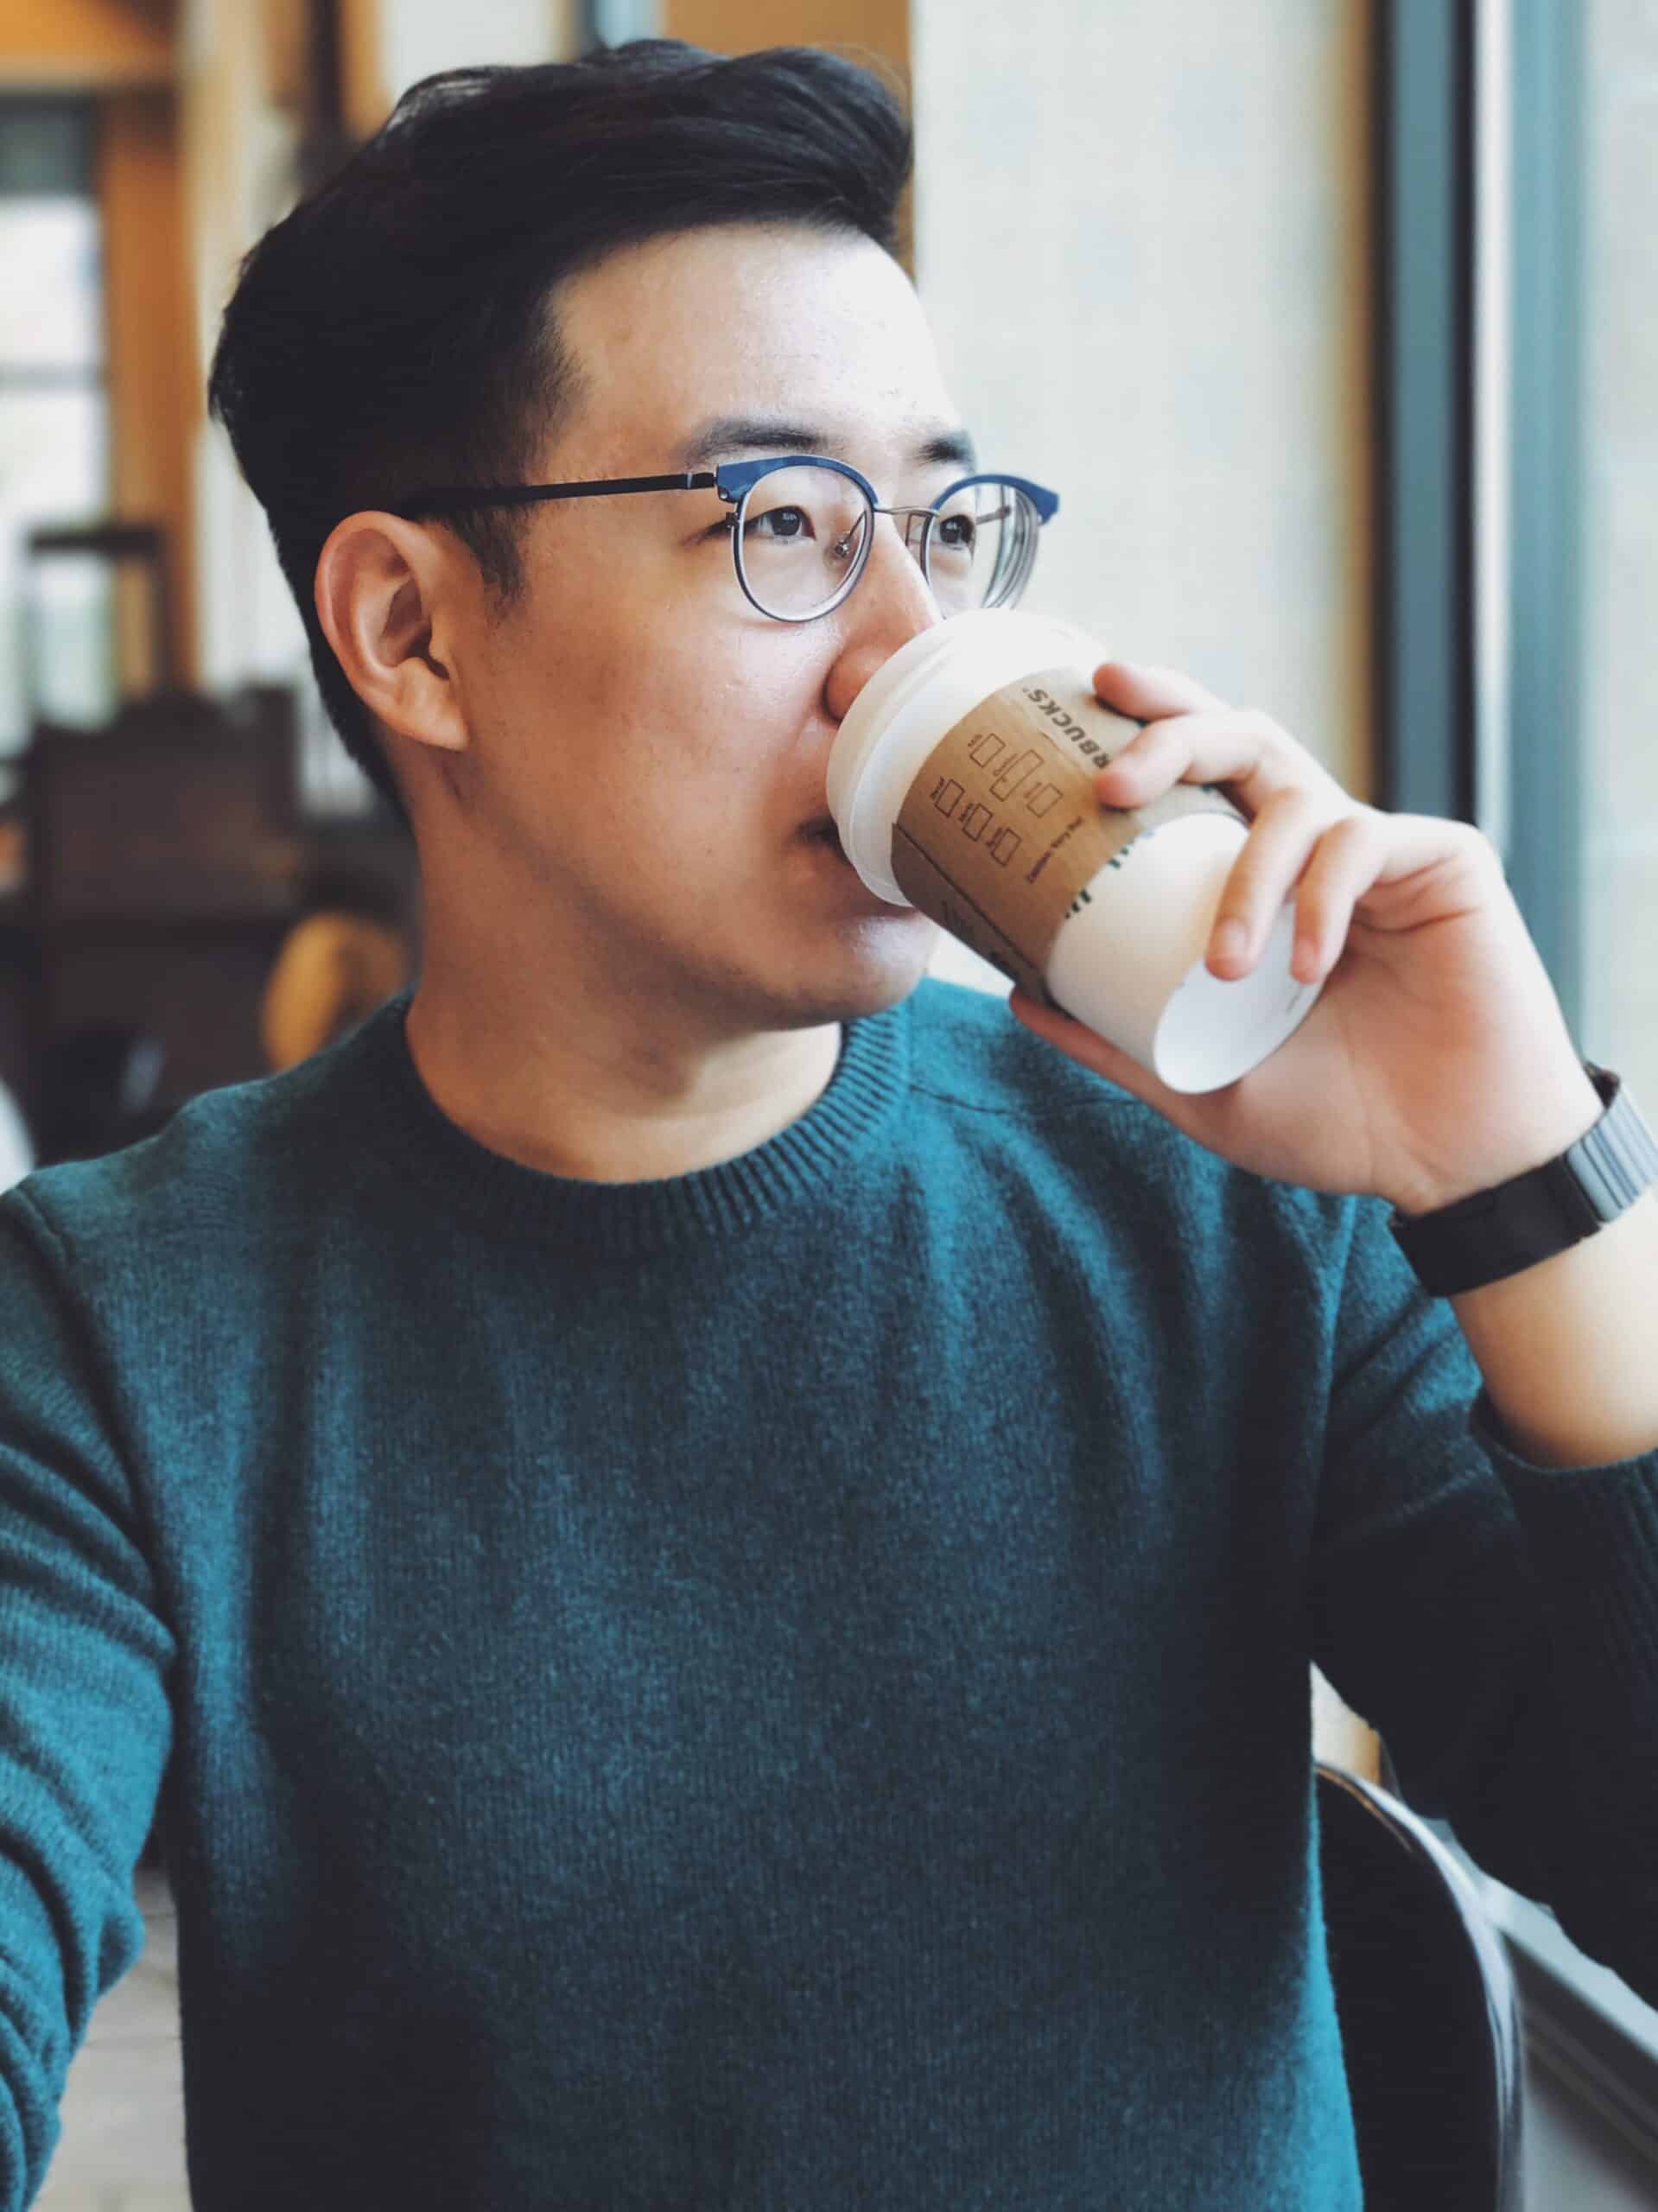 Man drinking from a Starbucks cup